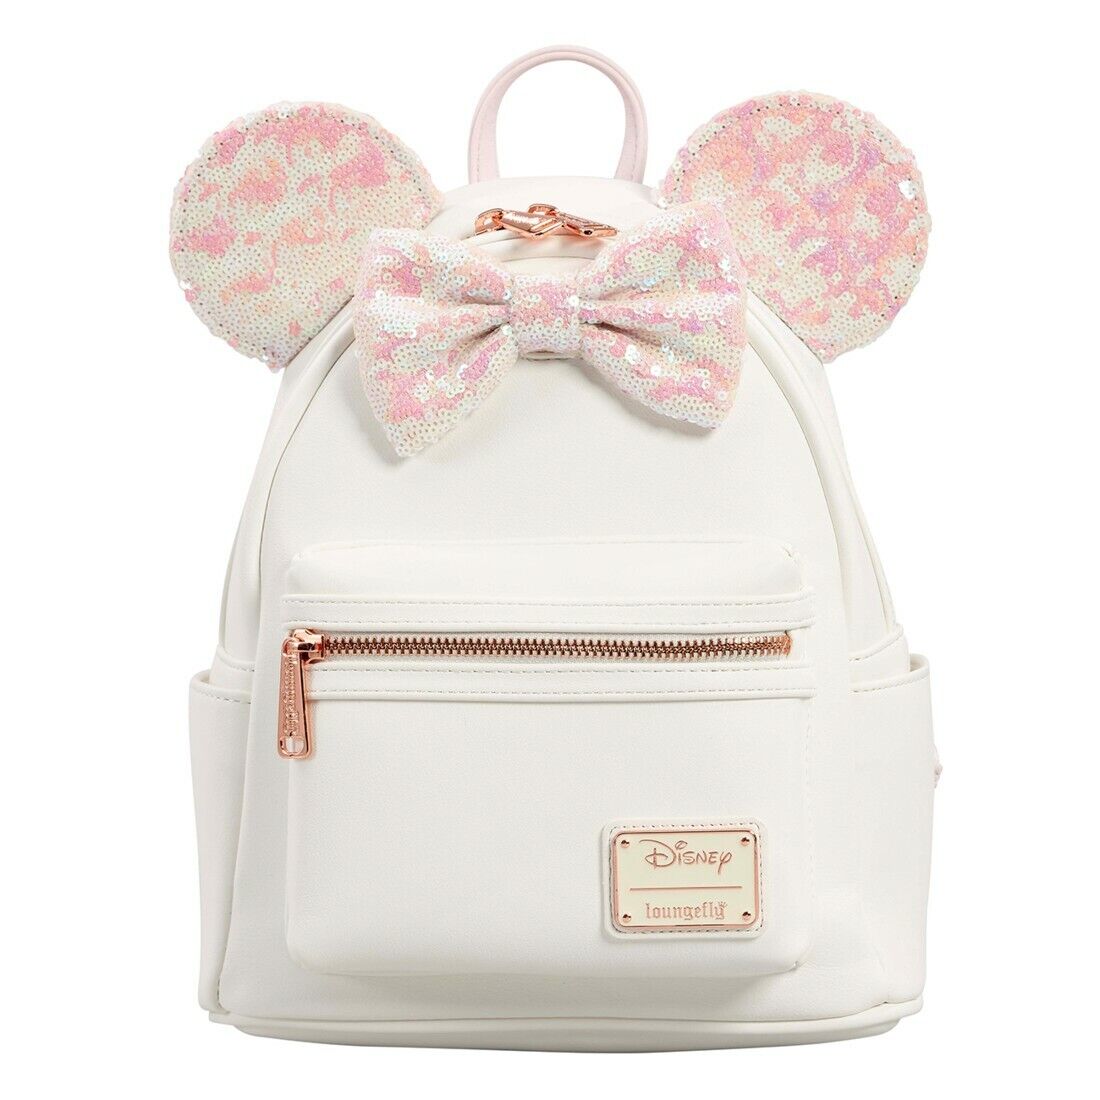 Loungefly Disney Minnie white iridescent holographic sequin backpack 